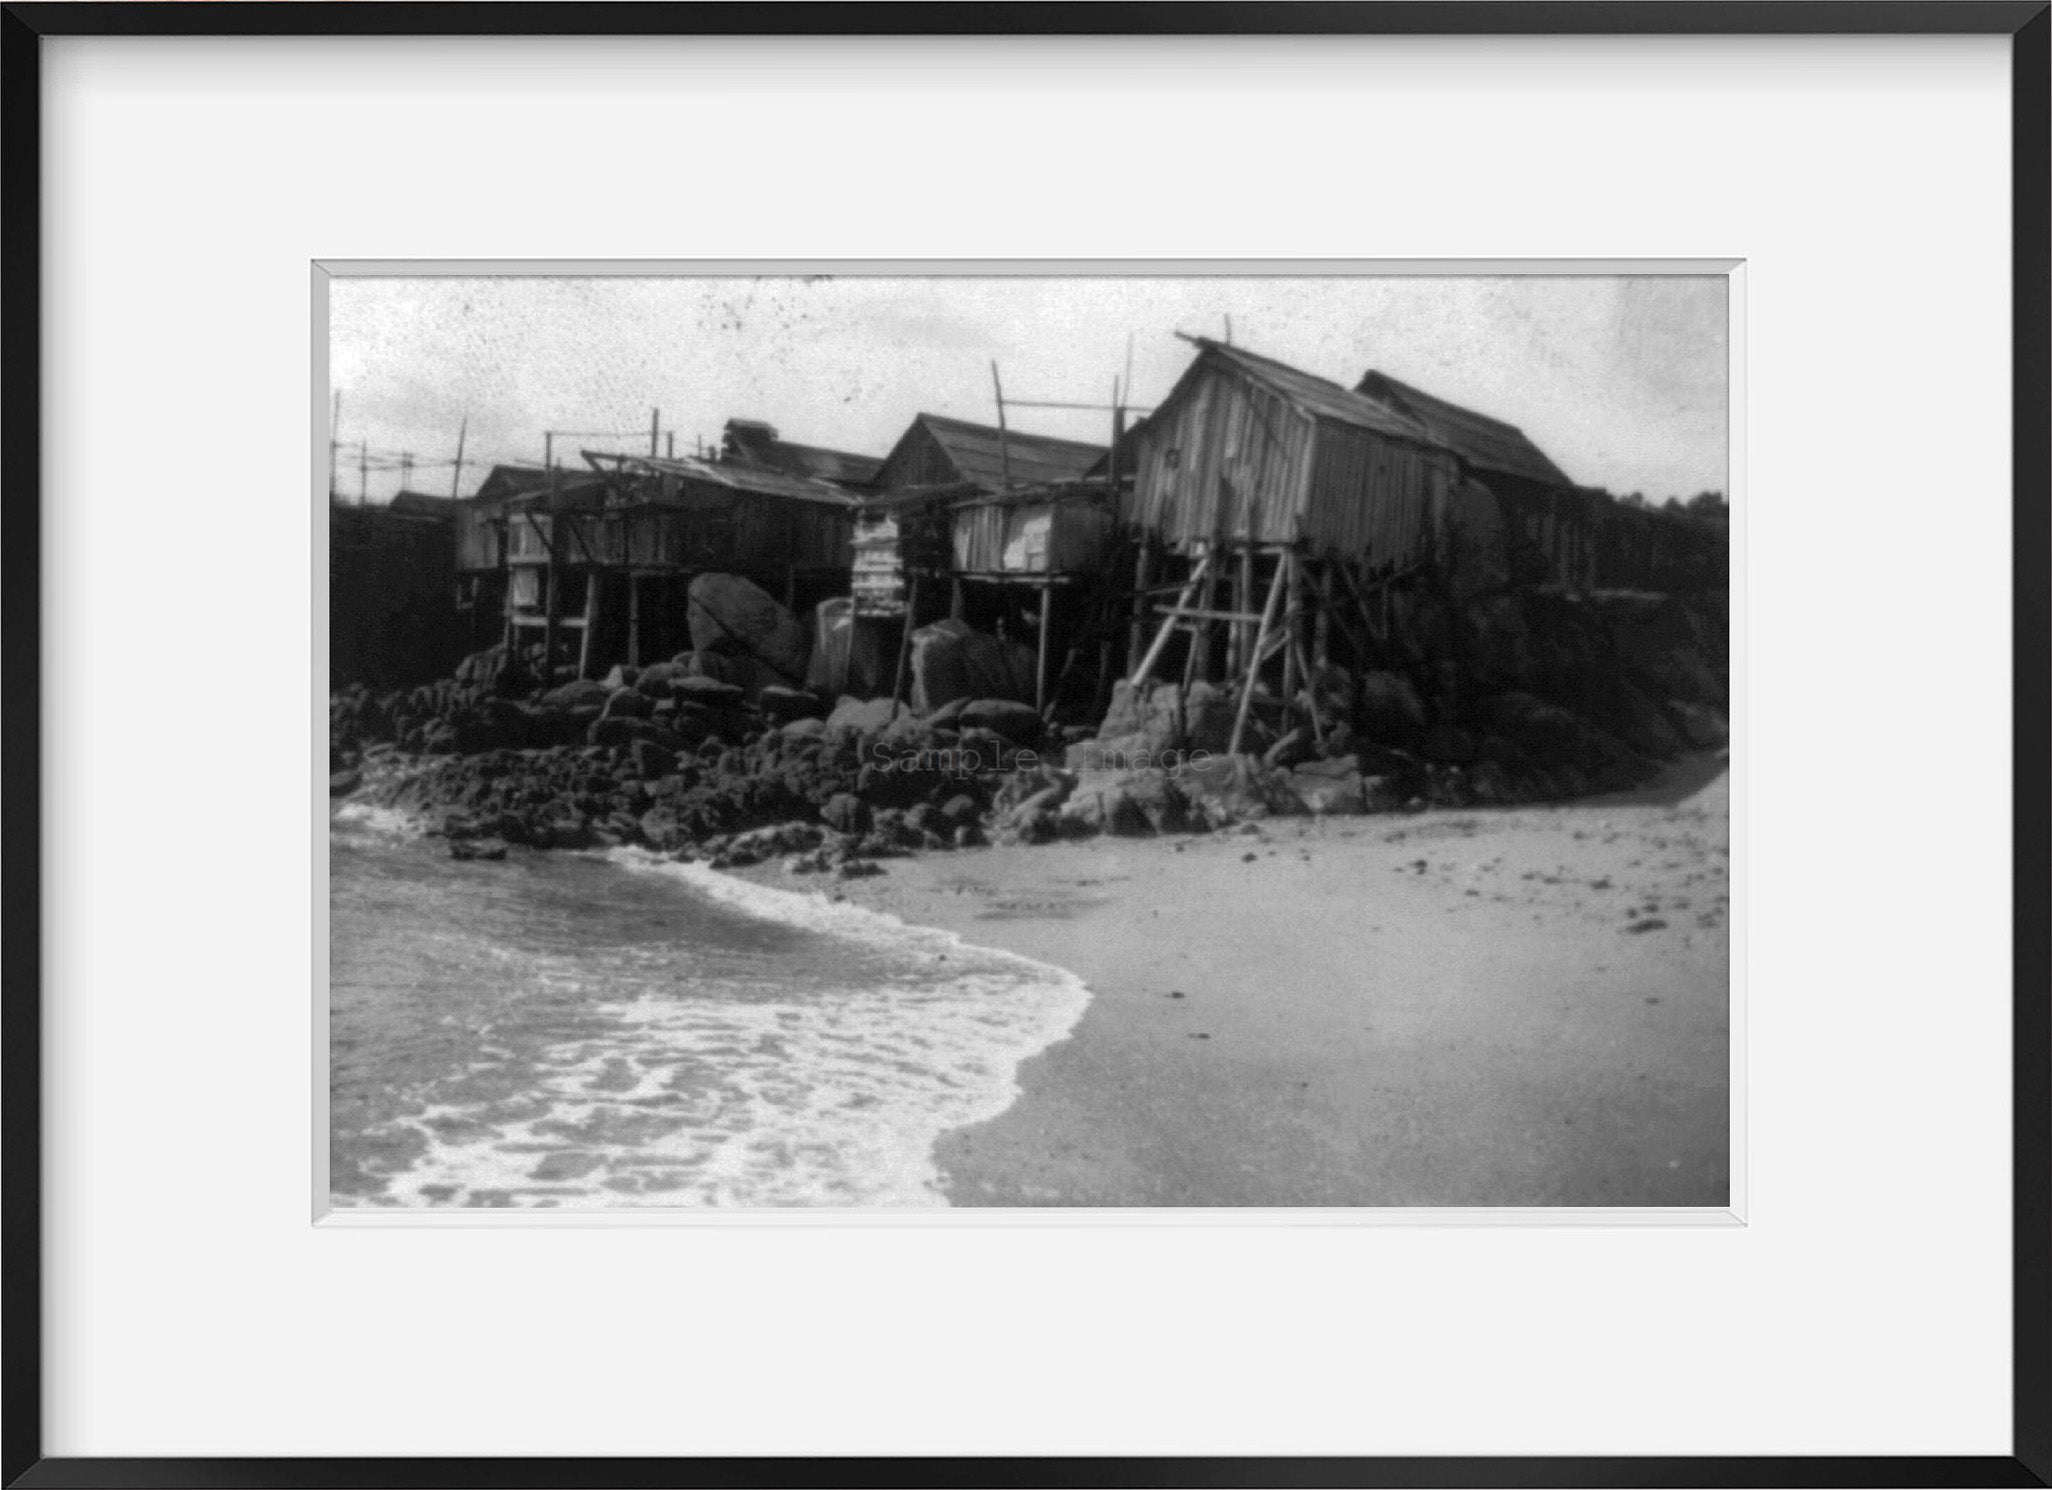 c1907 photograph of Chinese fishing village - Monterey Summary: Houses on stilts